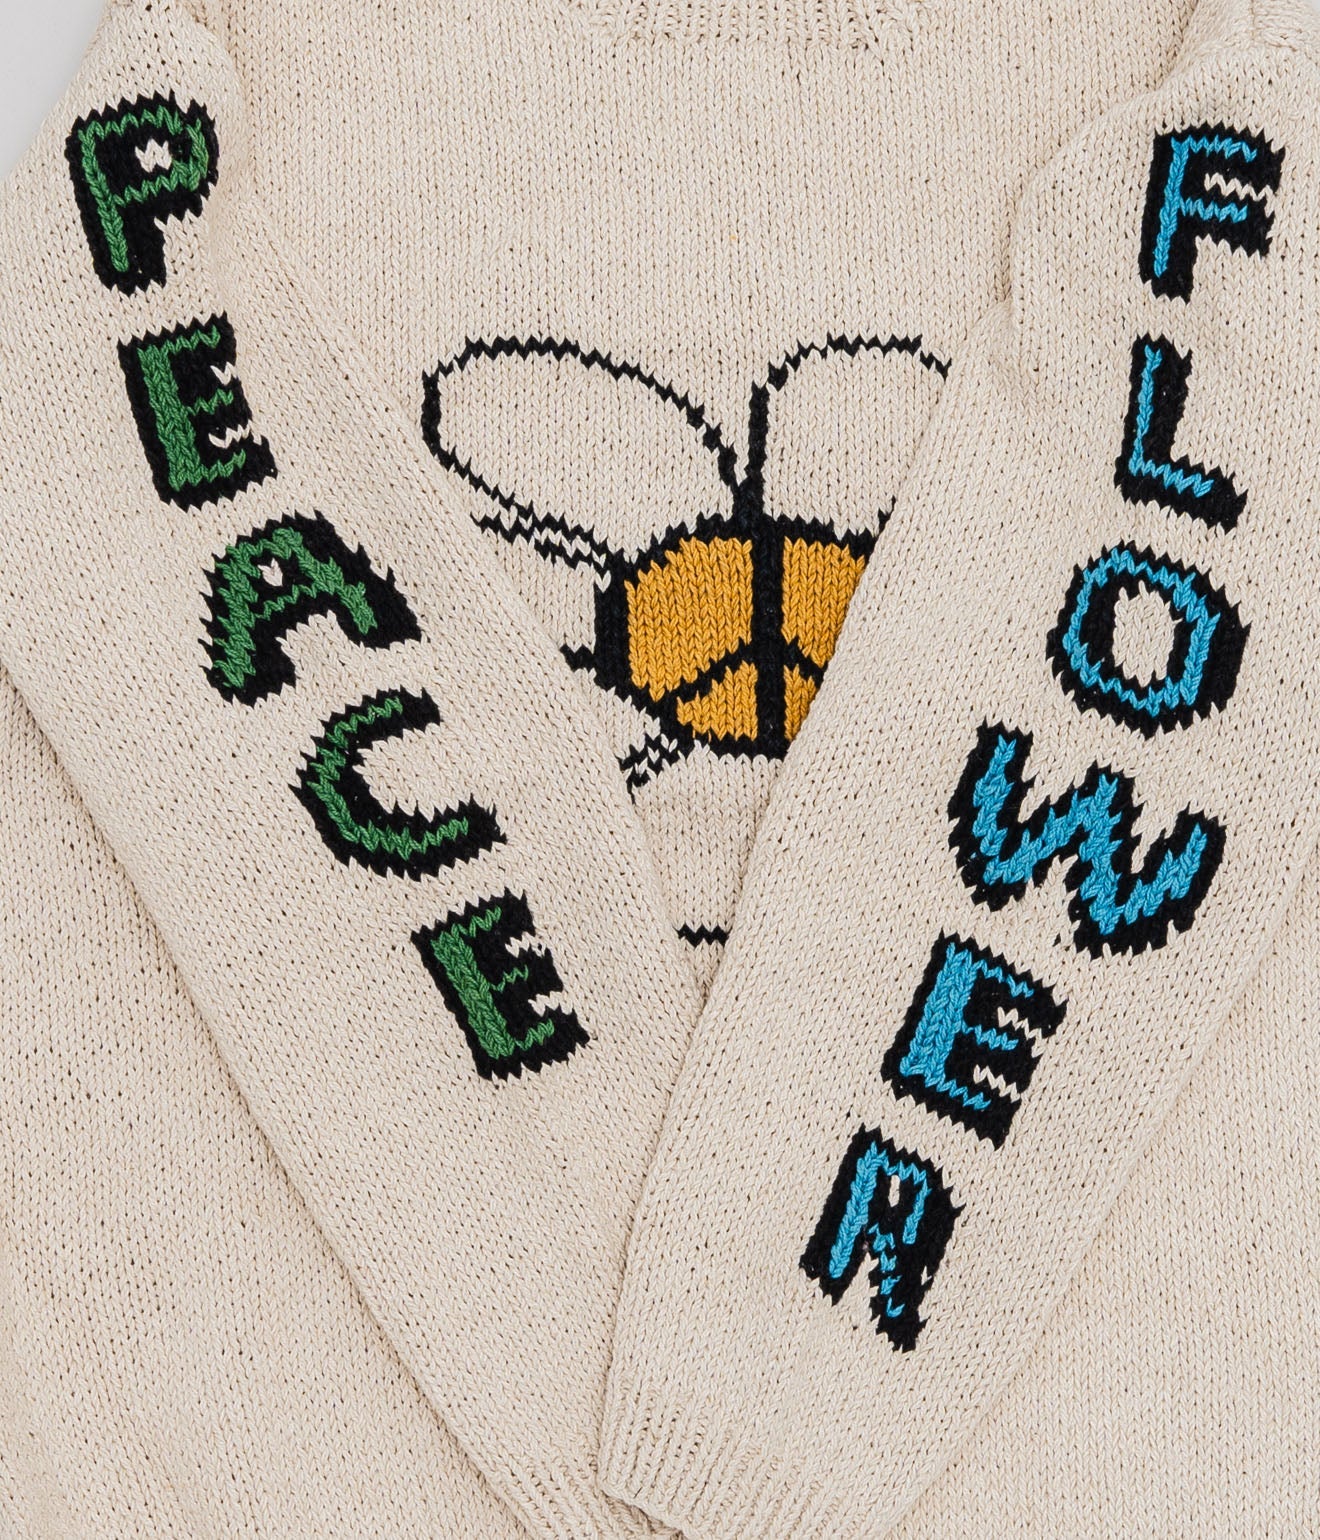 MacMahon Knitting Mills "L/S Crew Neck Knit-Peace&Flower" Natural - WEAREALLANIMALS